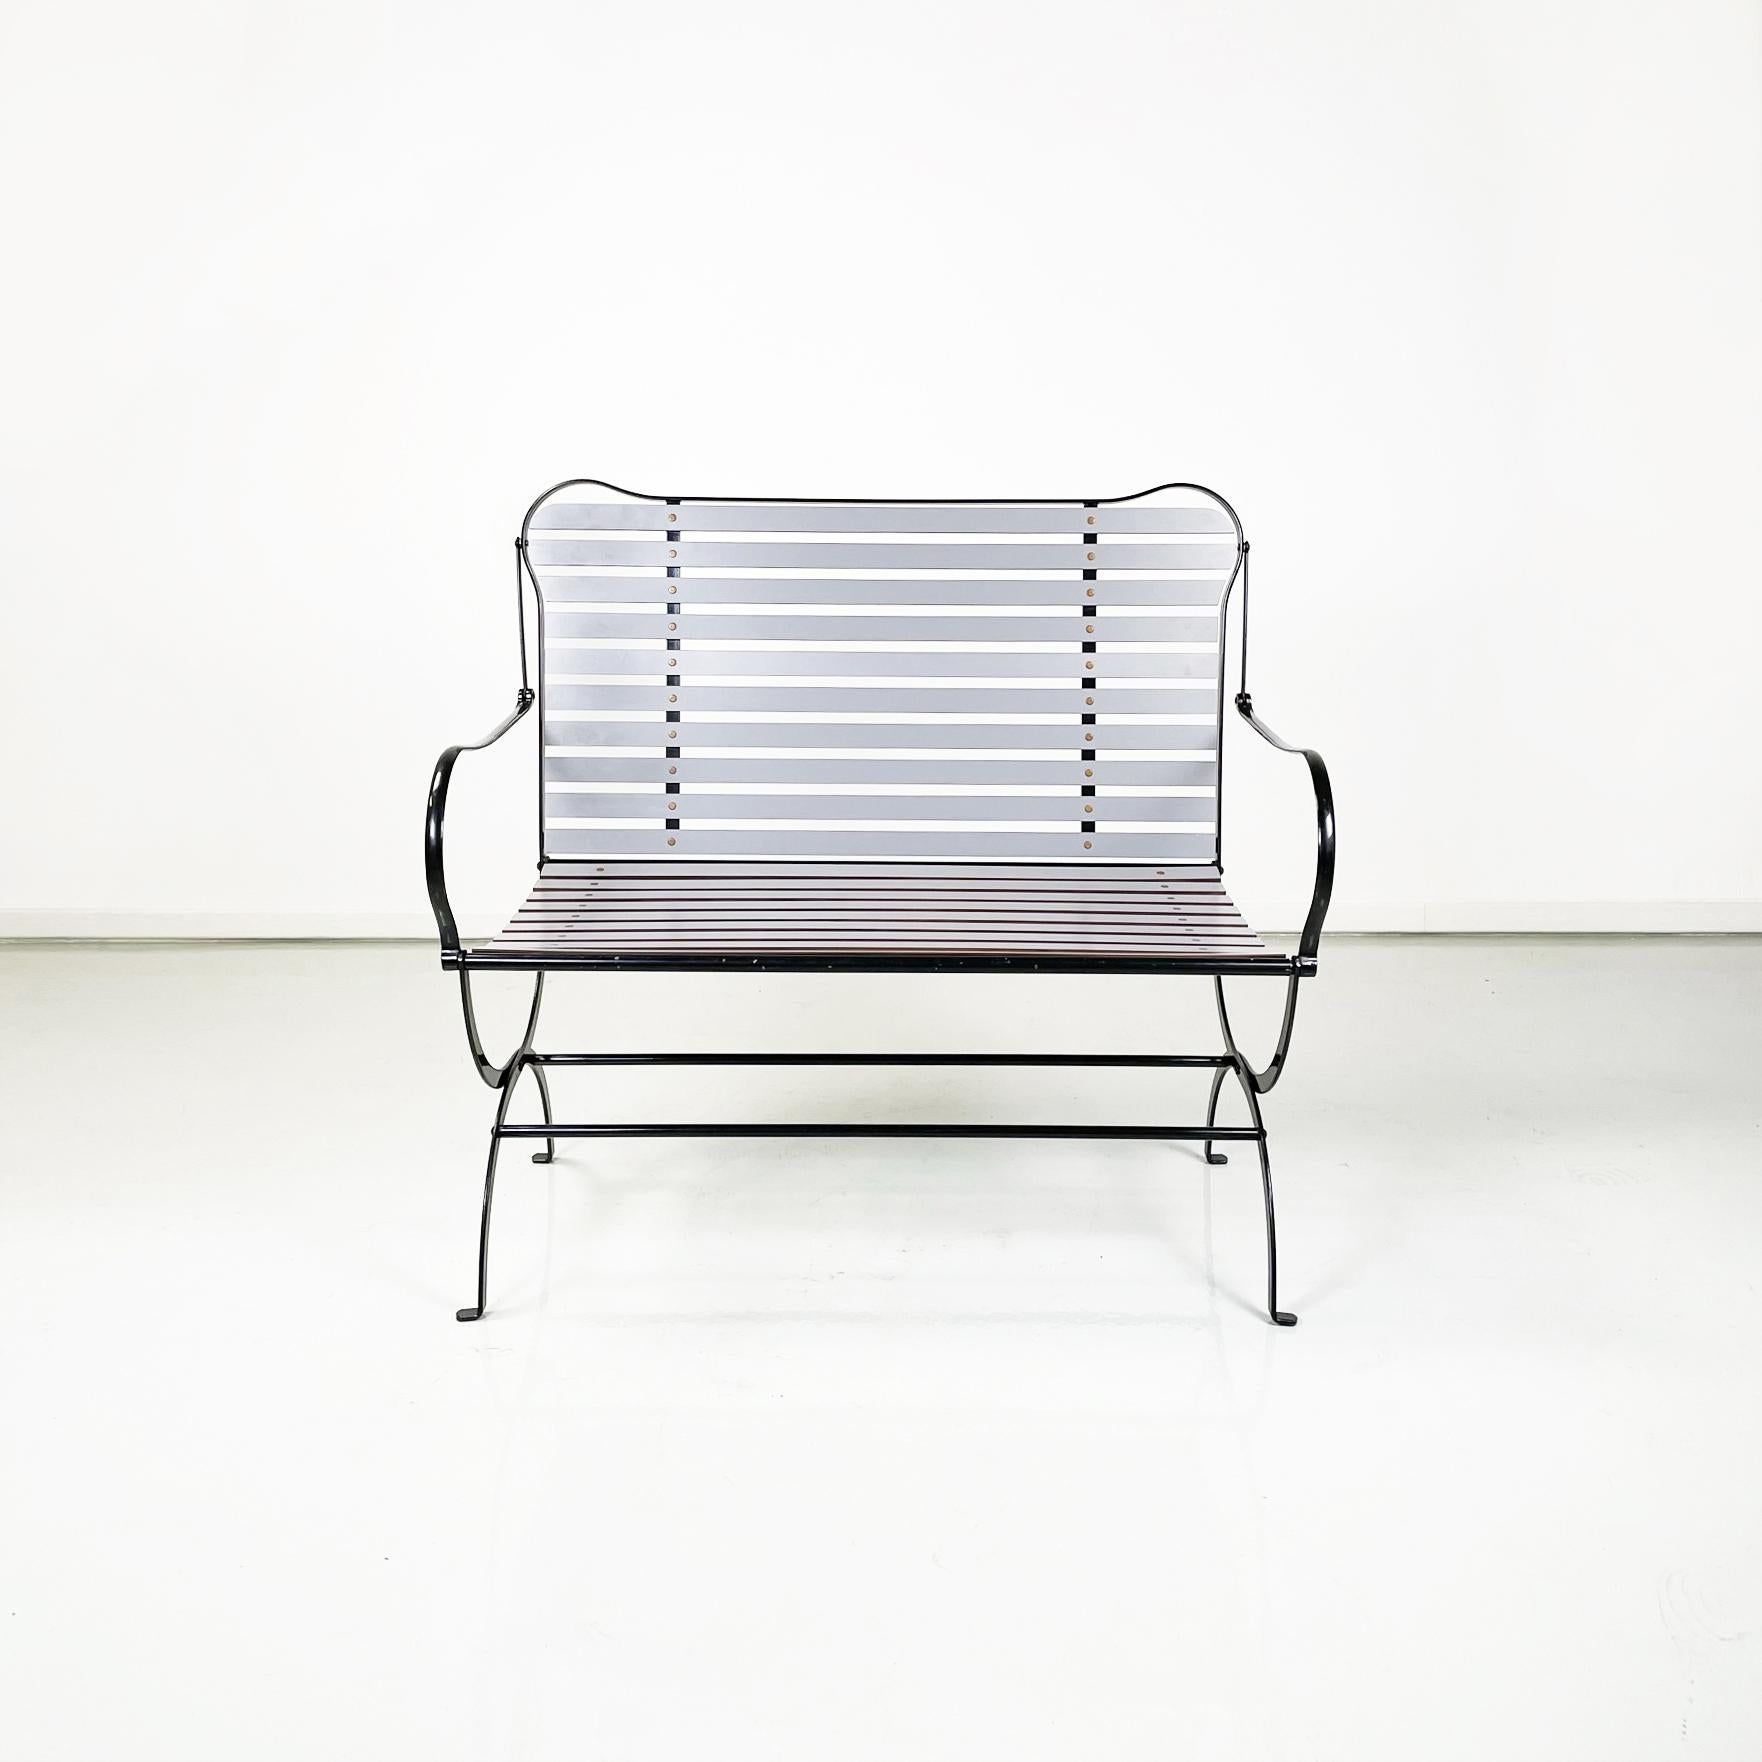 Italian modern Camilla Bench with armrests by Achille Castiglioni Zanotta, 1984
Fantastic folding bench with armrests mod. Camilla Bench with seat and back in light gray painted laminate. The structure is in black painted metal. Totally resealable.